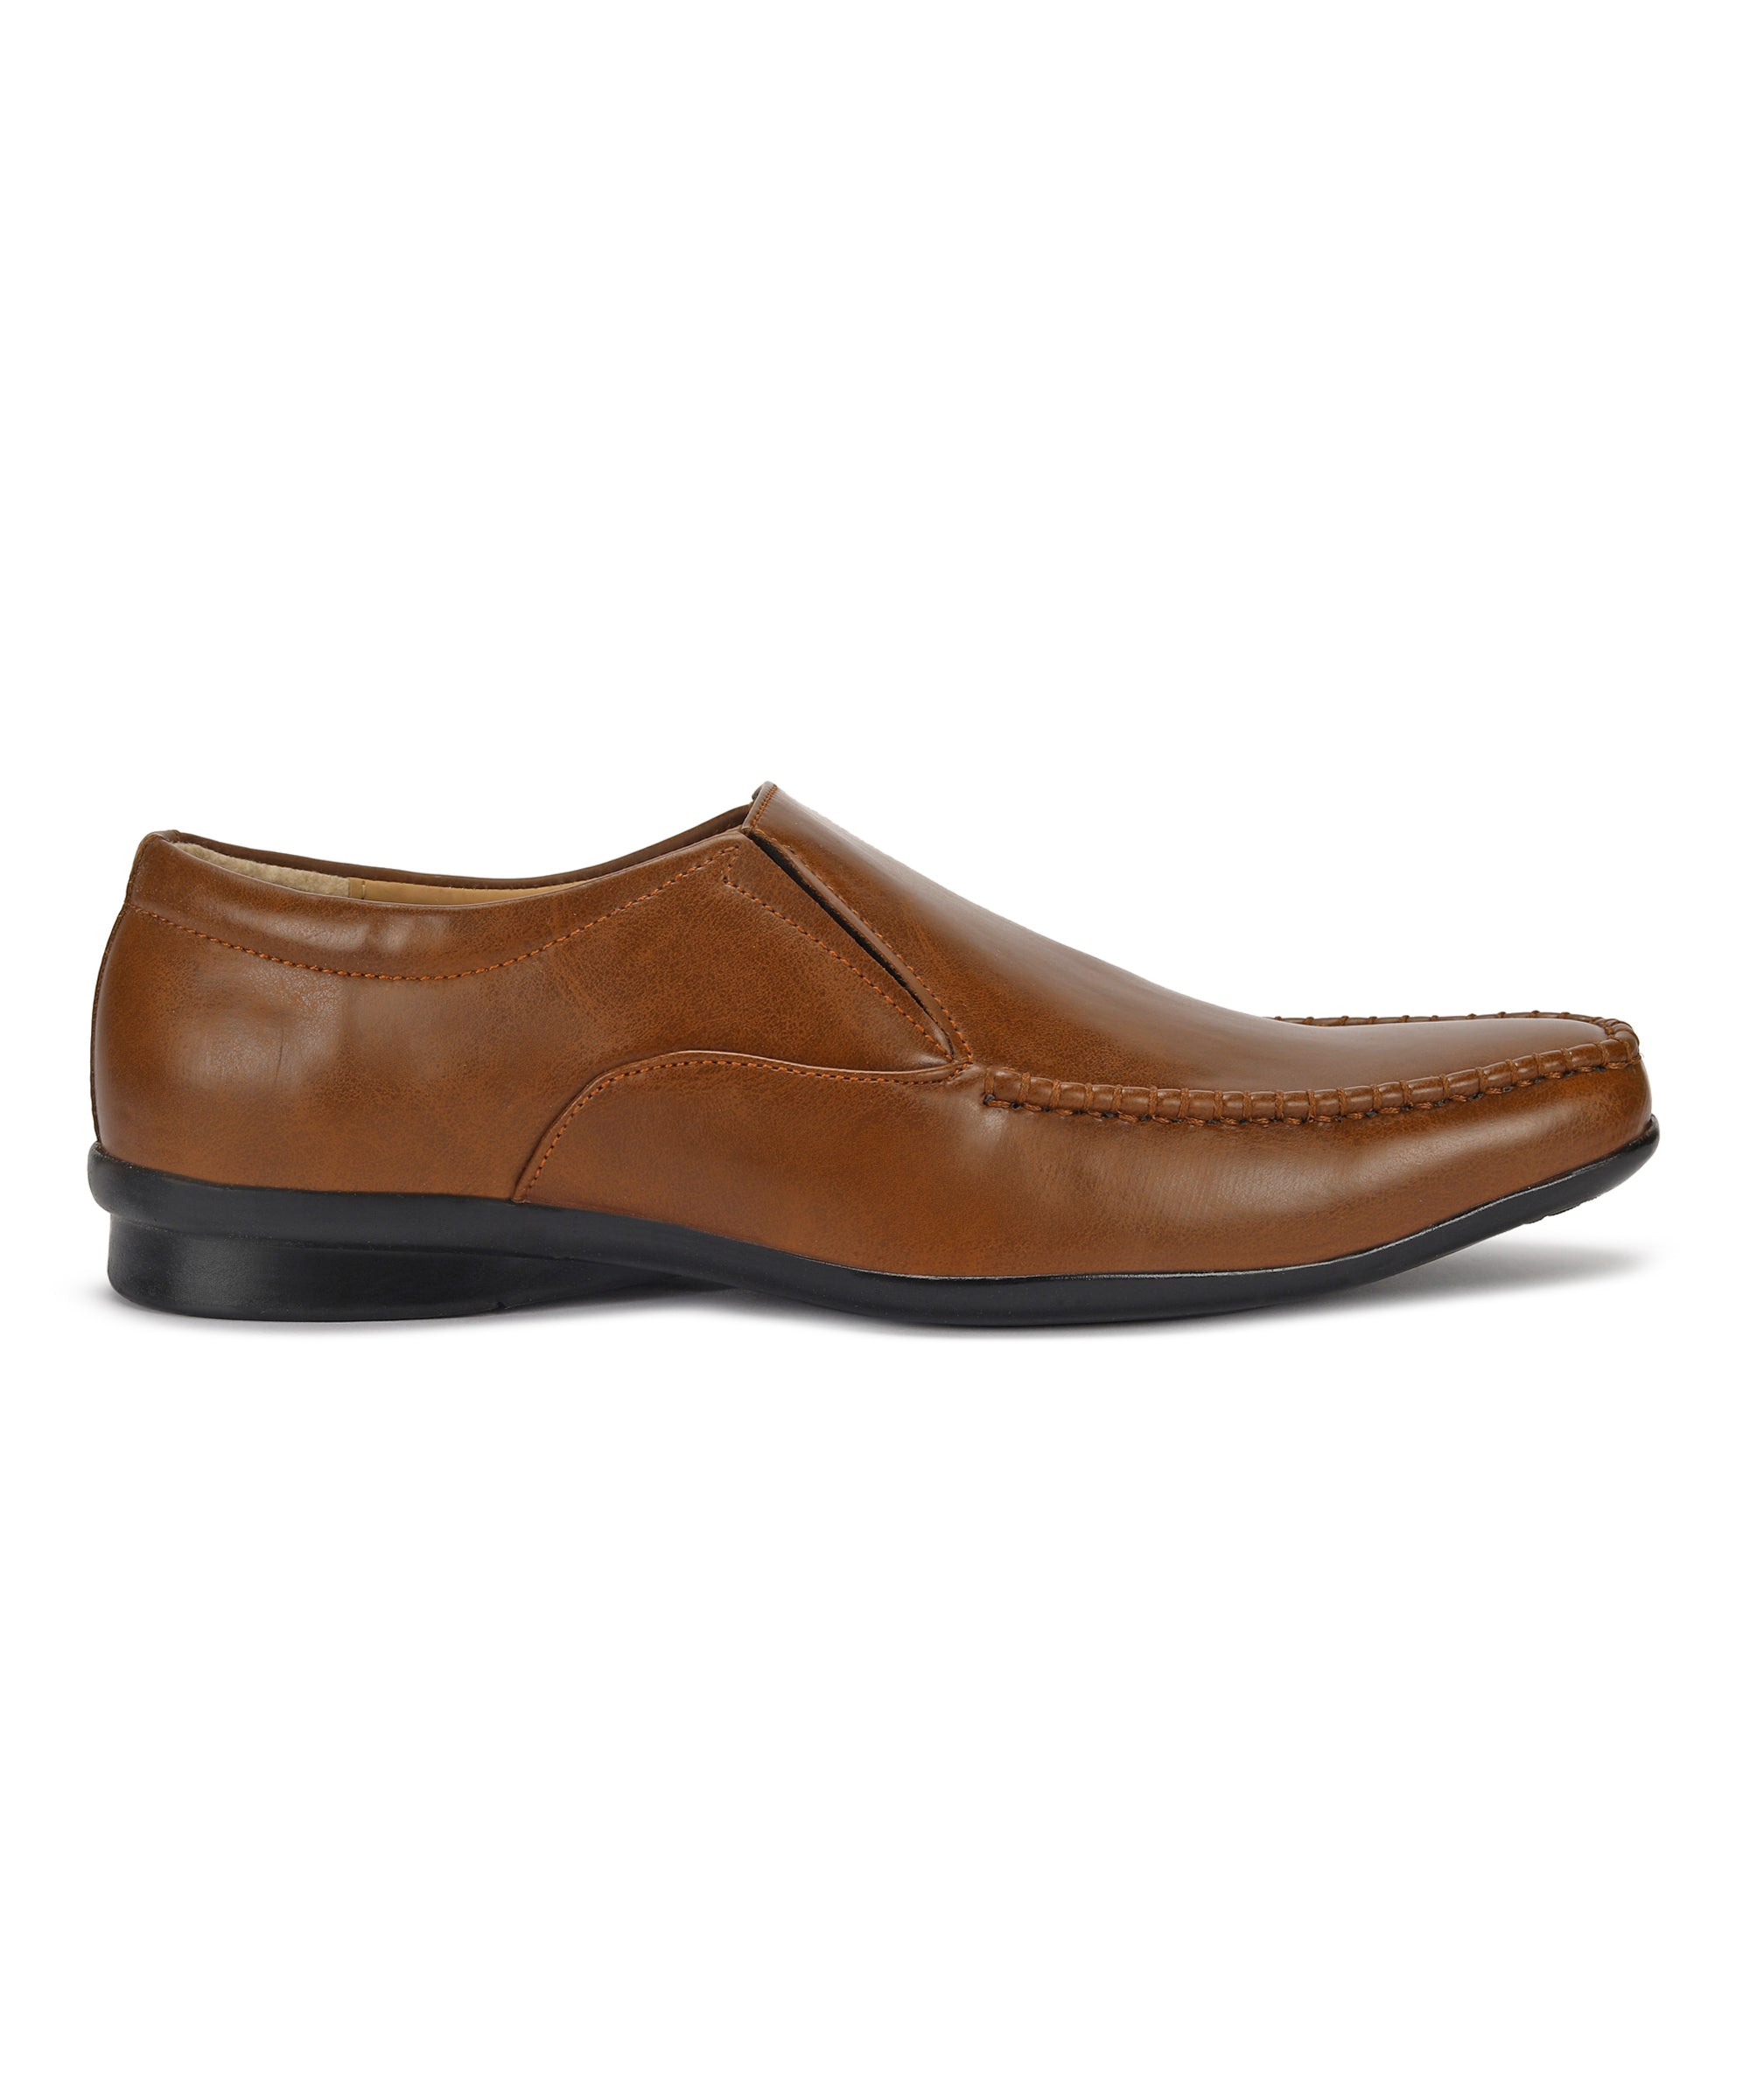 Paragon  K11236G Men Formal Shoes | Corporate Office Shoes | Smart &amp; Sleek Design | Comfortable Sole with Cushioning | For Daily &amp; Occasion Wear